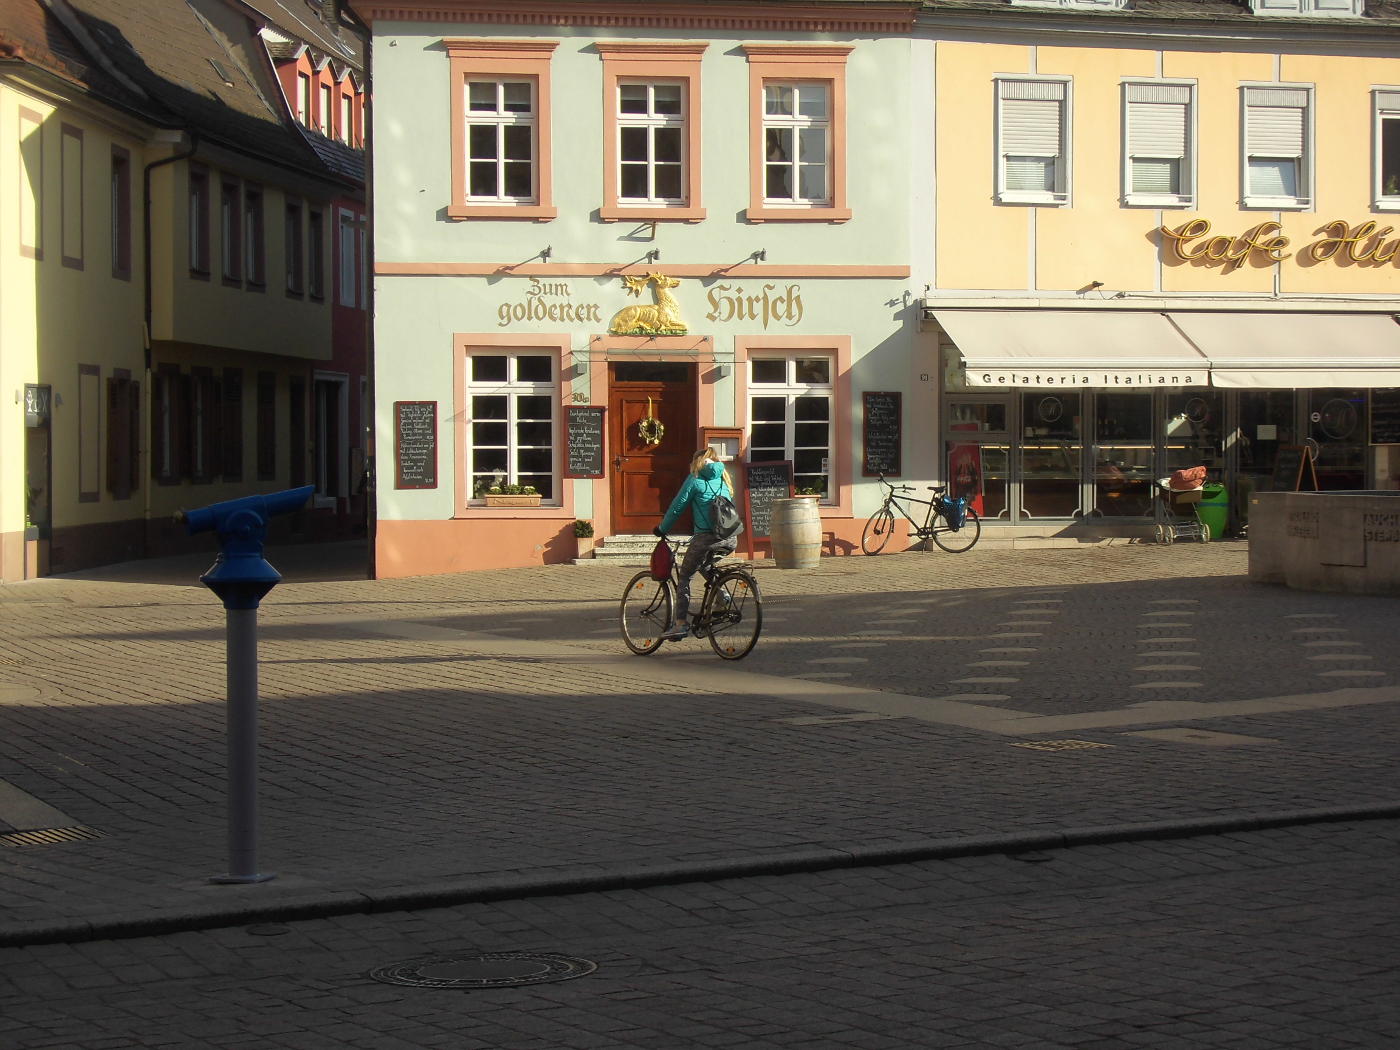 Speyer, Bruchsal: No Jehovah's Witnesses